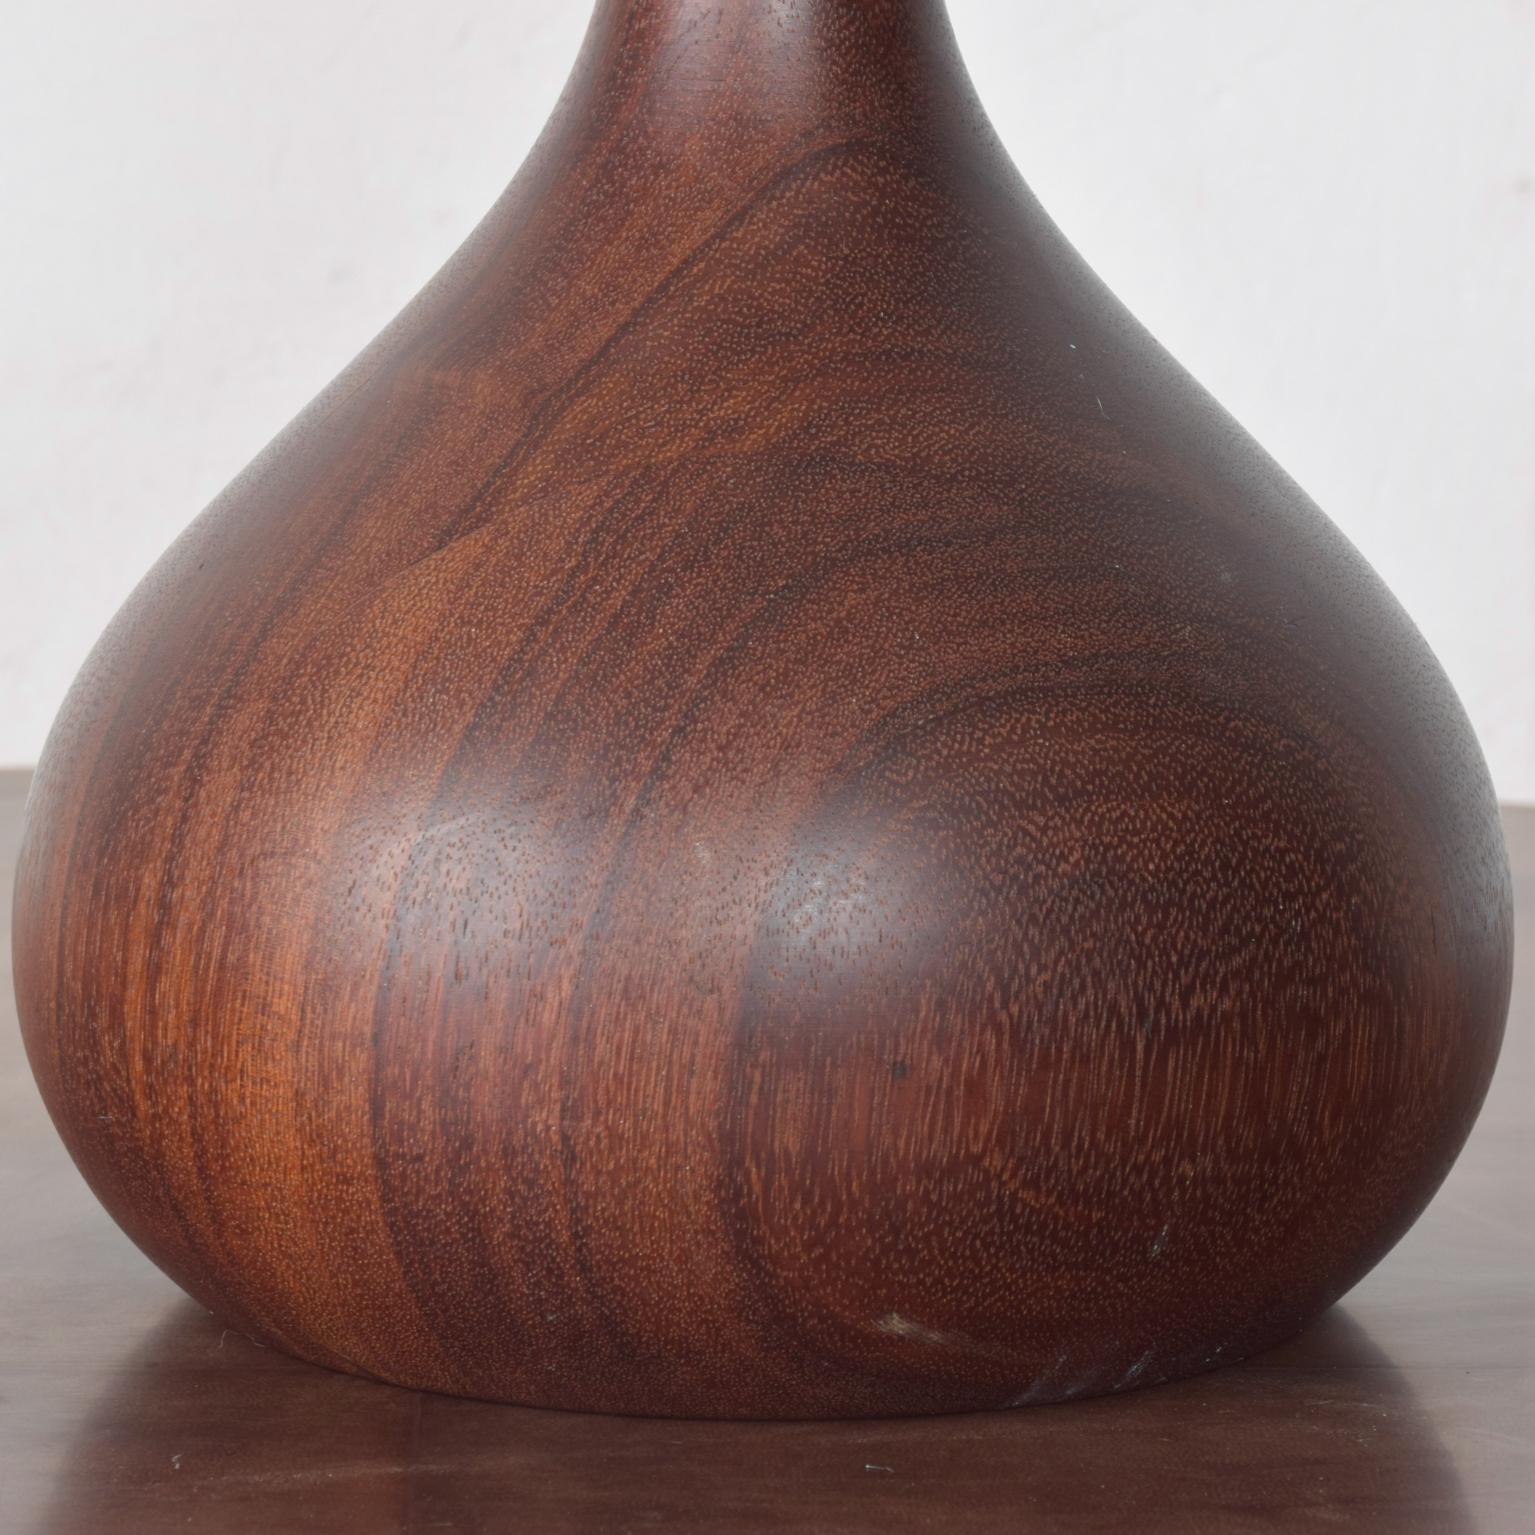 For your consideration: an elegant midcentury Danish modern solid teak tear drop table lamp features a teak wood turned body with organic curves. Designed and manufactured in Denmark circa 1950s. Unmarked.

Dimensions: 22 1/2